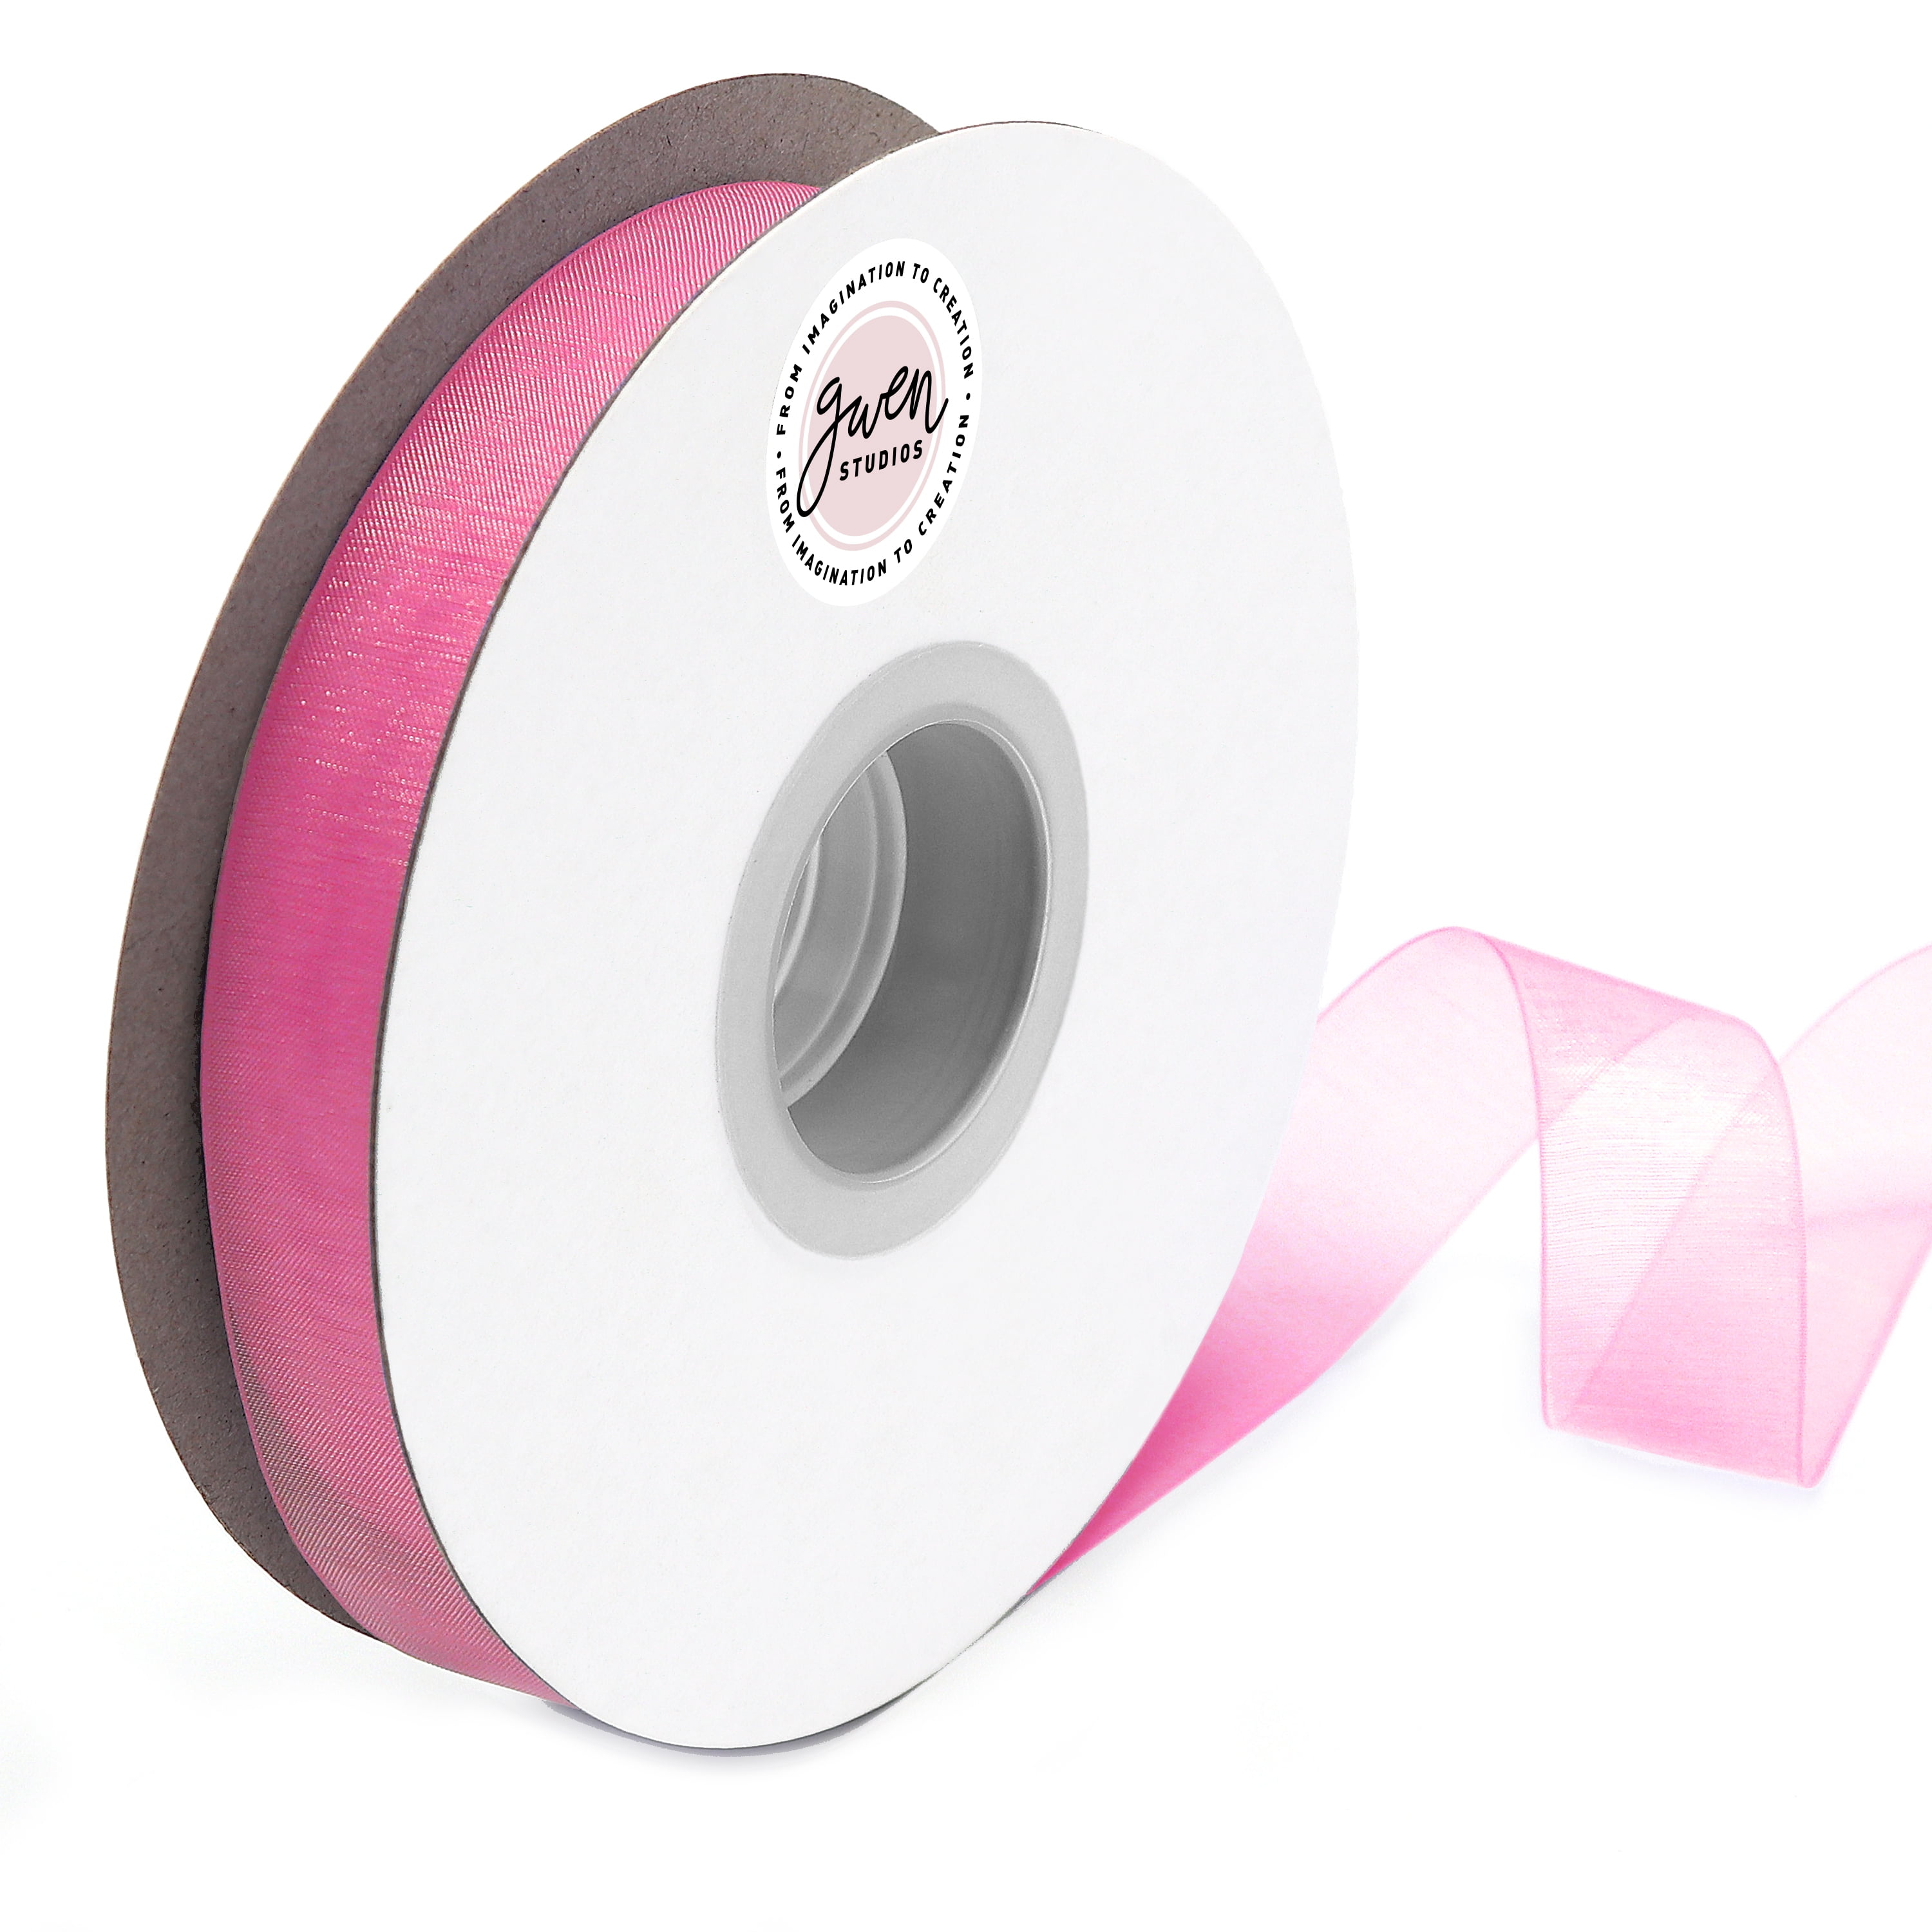 Pink Satin Ribbon 40mm22m Double Fabric Ribbon Craft Ribbons For Acsergery  Sewing Gift